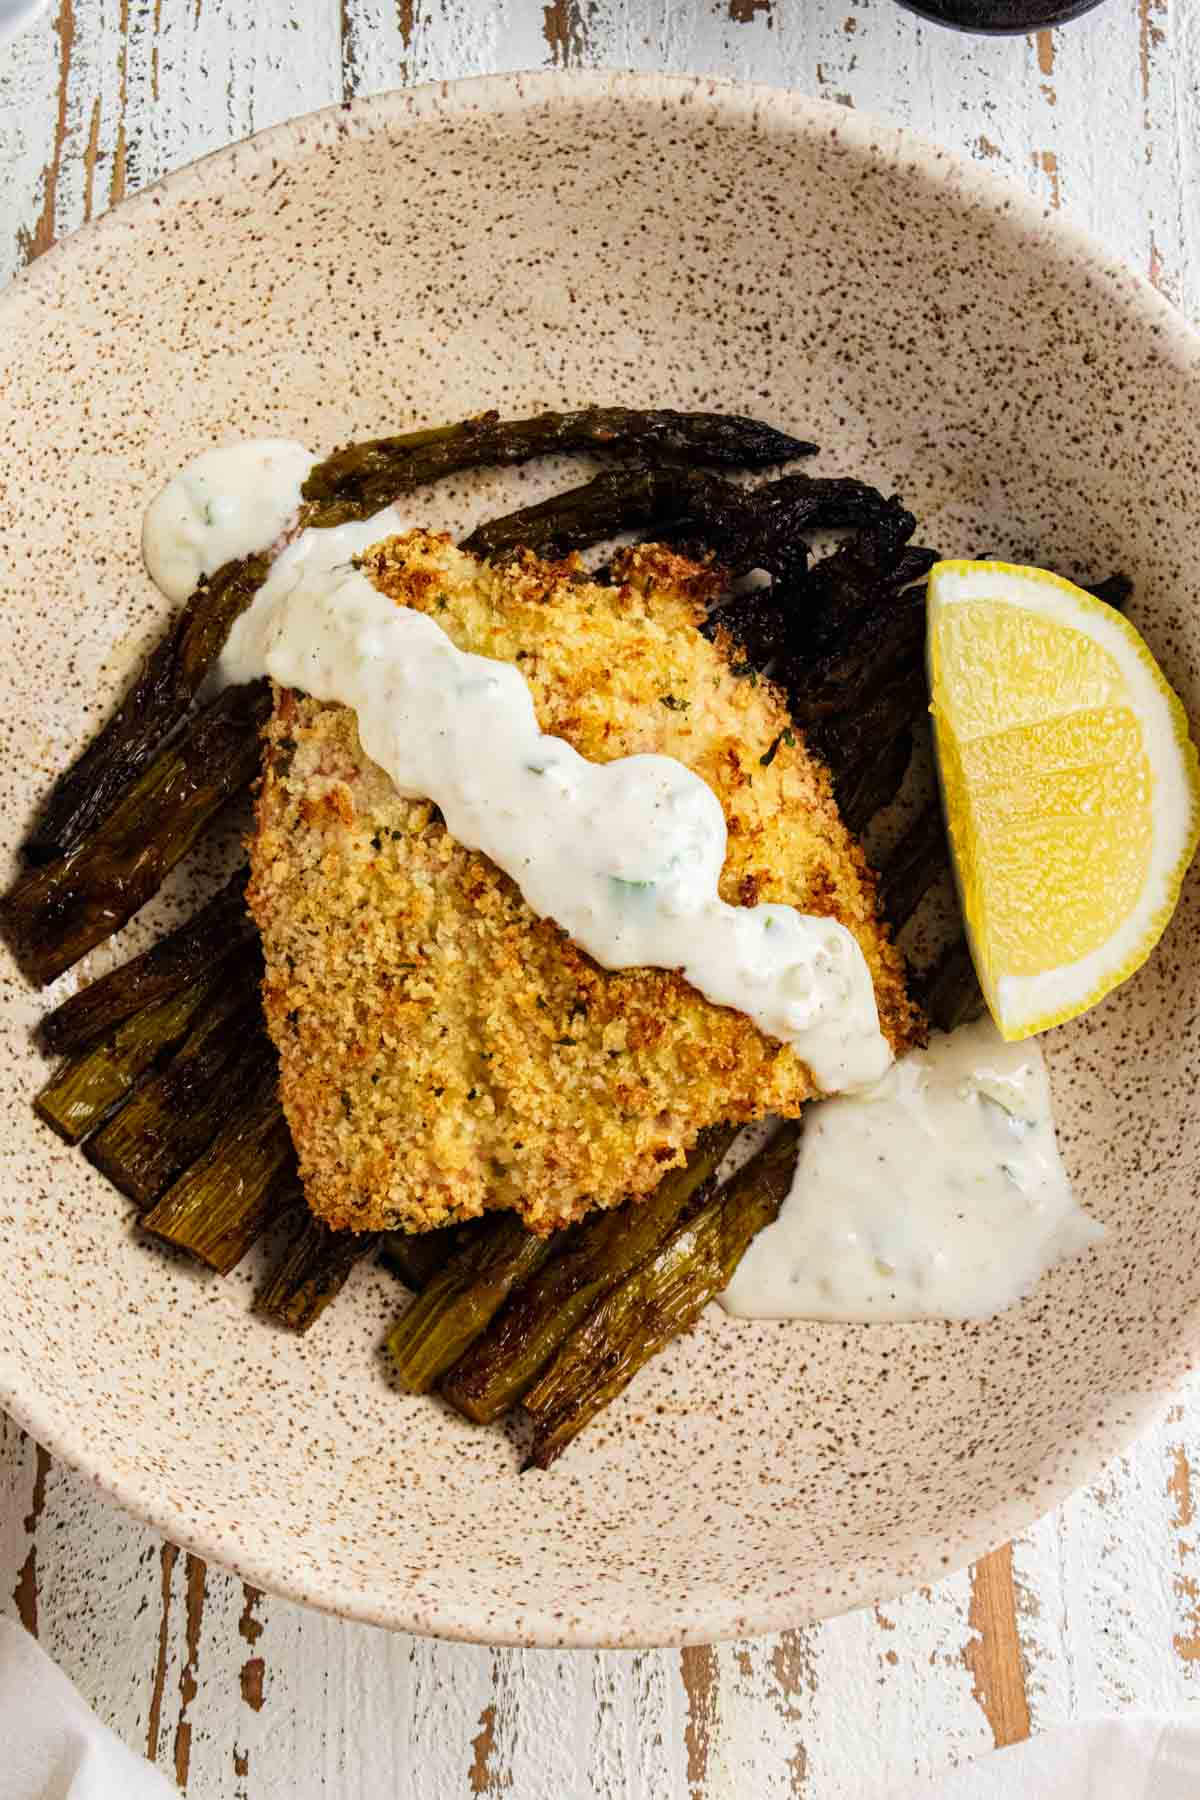 A close up of panko crusted salmon on a cream colored plate with tartar sauce drizzled on top and a slice of lemon on the side.